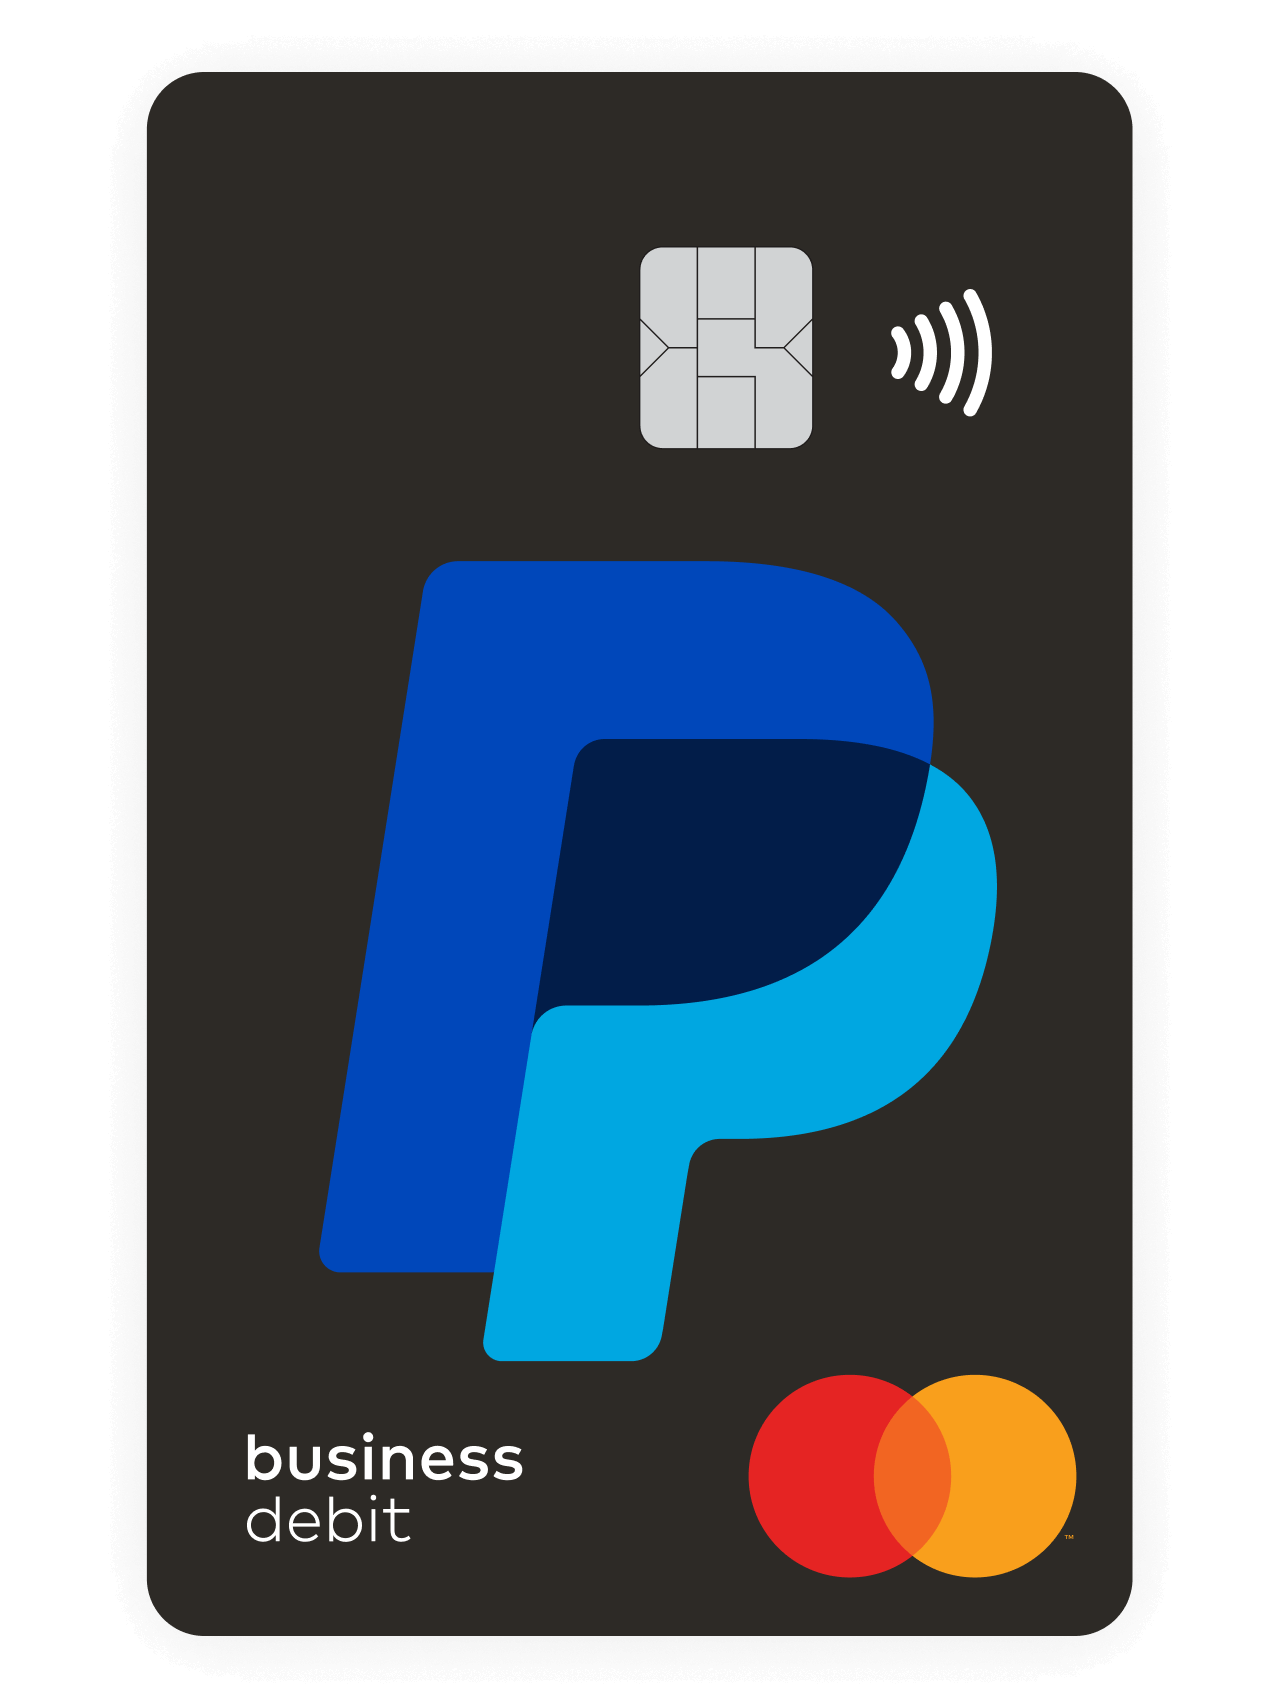 Use virtual card numbers to pay online or in apps - Android - Google Pay Help